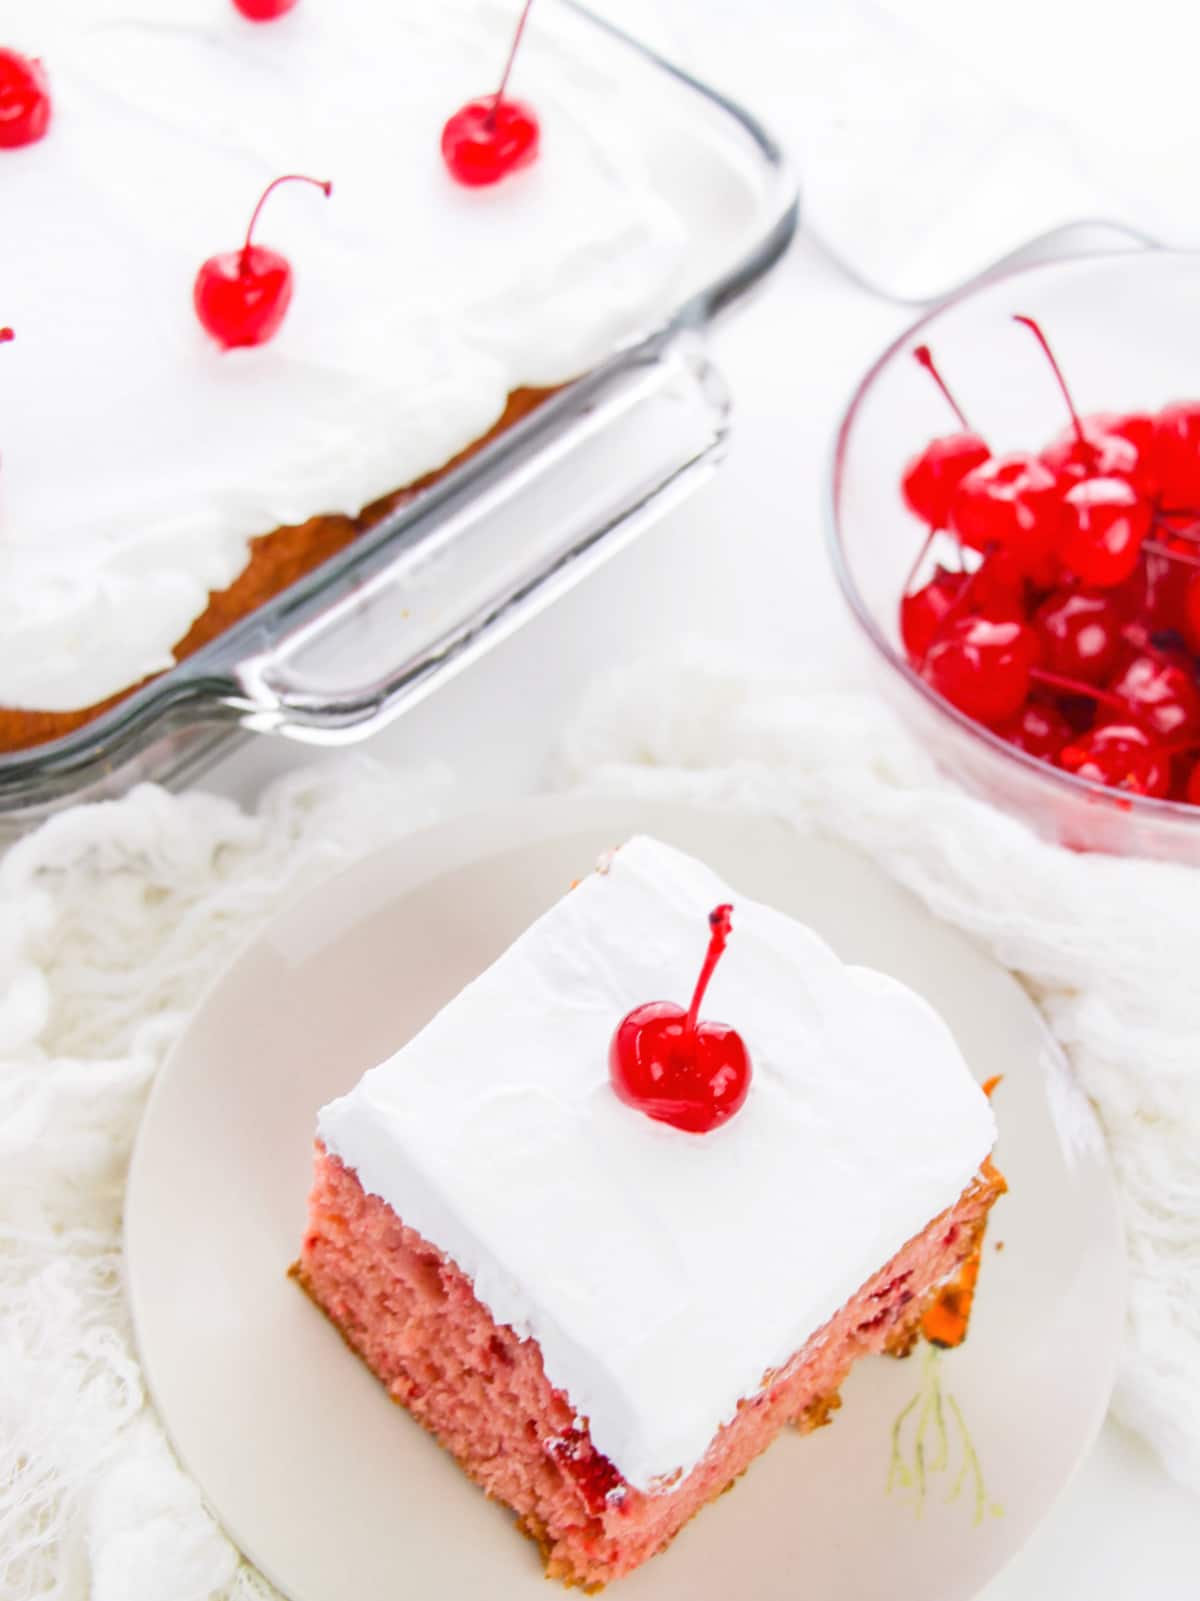 Slice of Cherry Cake on a white Plate